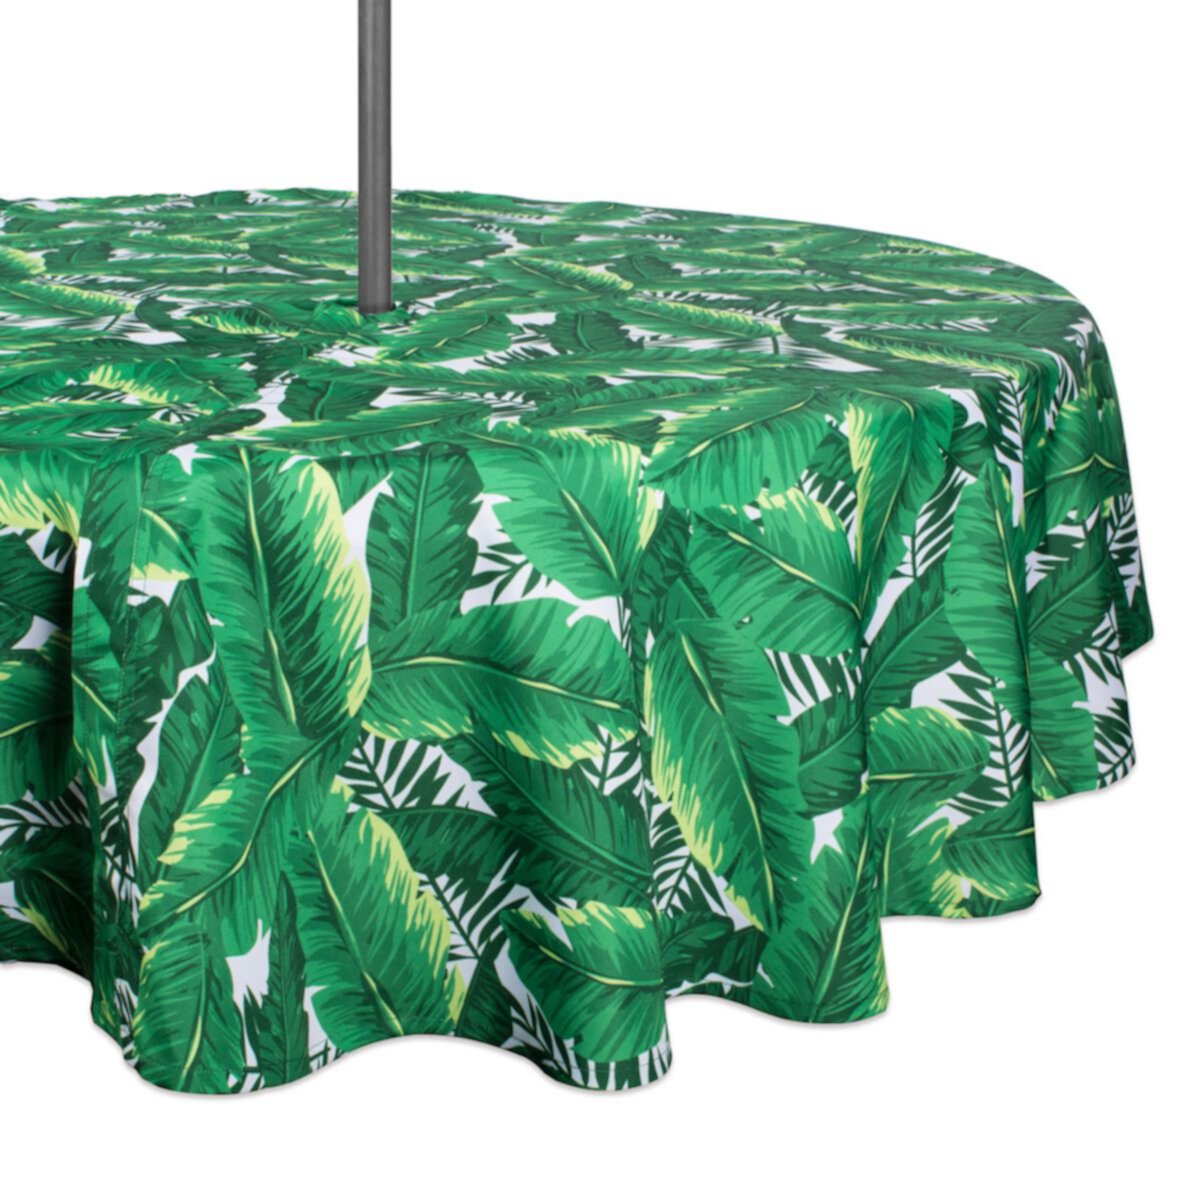 Green and White Banana Leaf Rounded Tablecloth with Zipper 60” CC Home Furnishings